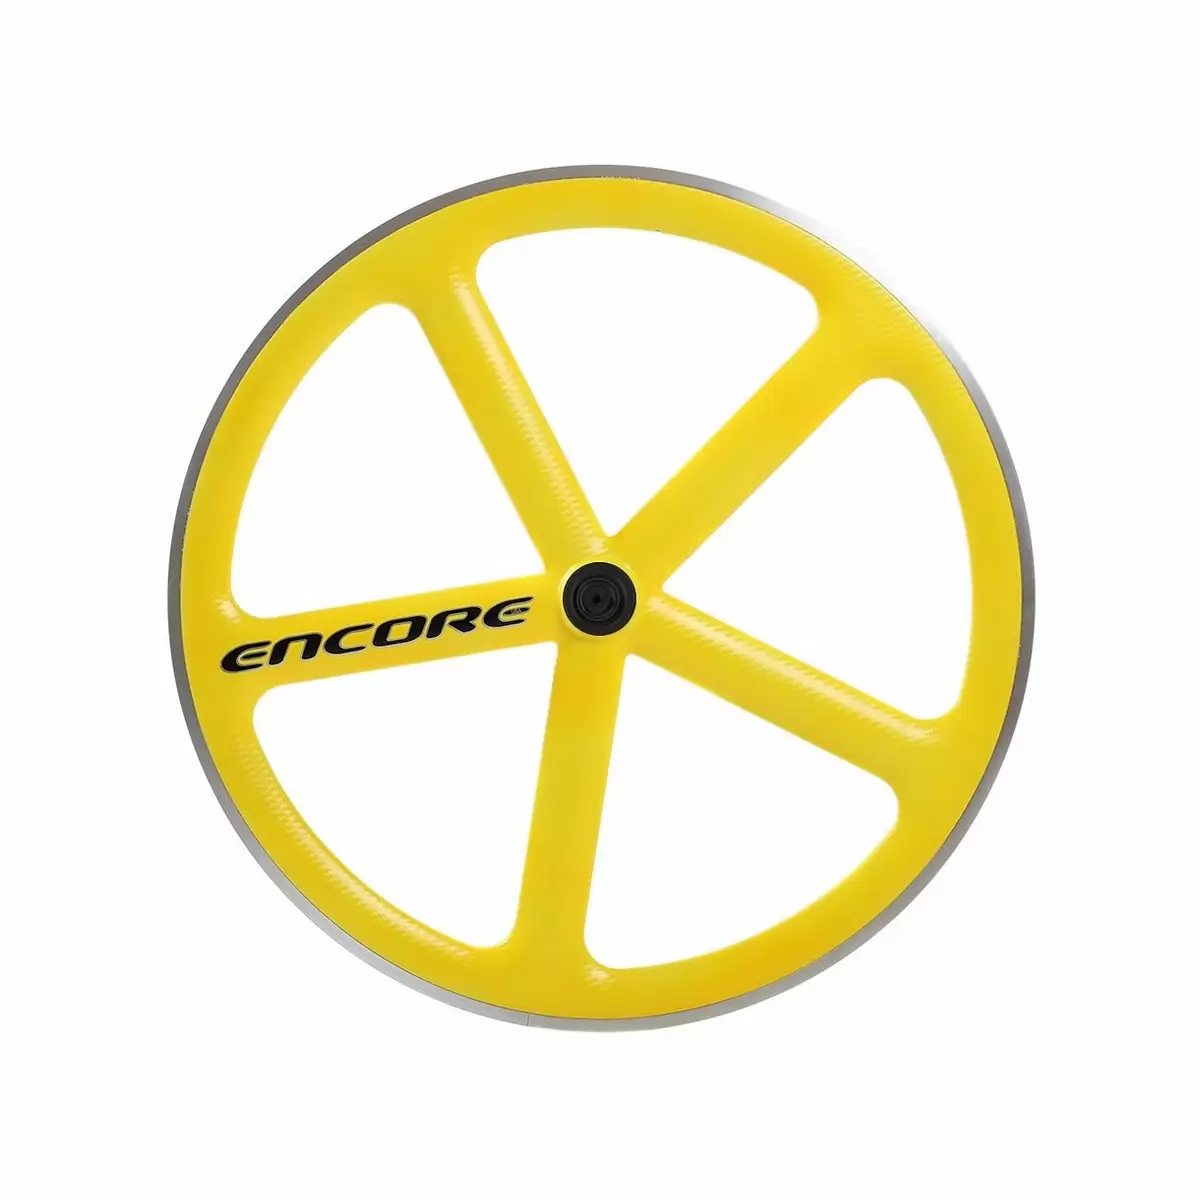 rear wheel 700c track 5 spokes carbon weave neon yellow msw - image